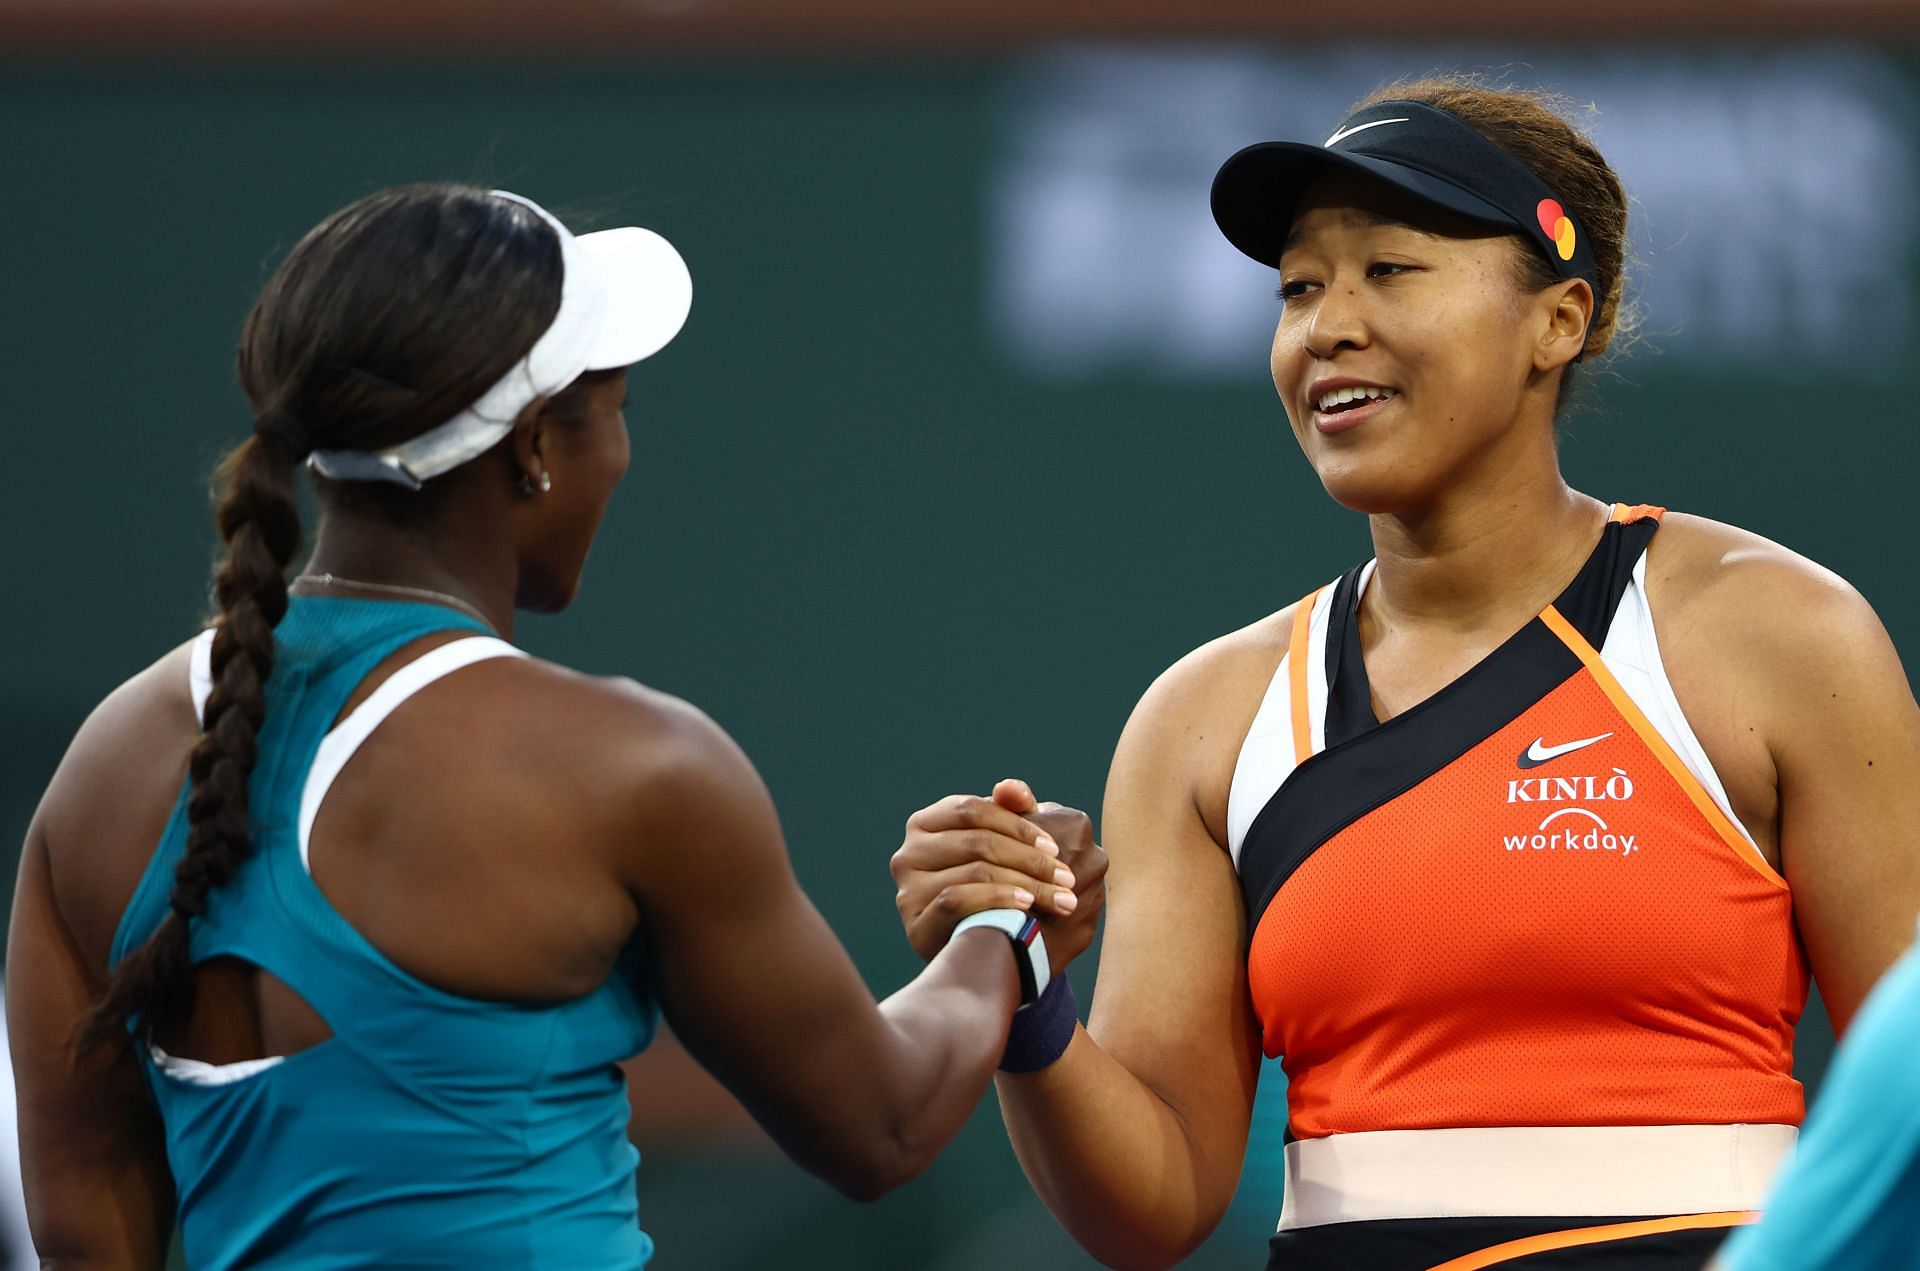 Sloane Stephens (L) and Naomi Osaka at the 2022 Indian Wells Open